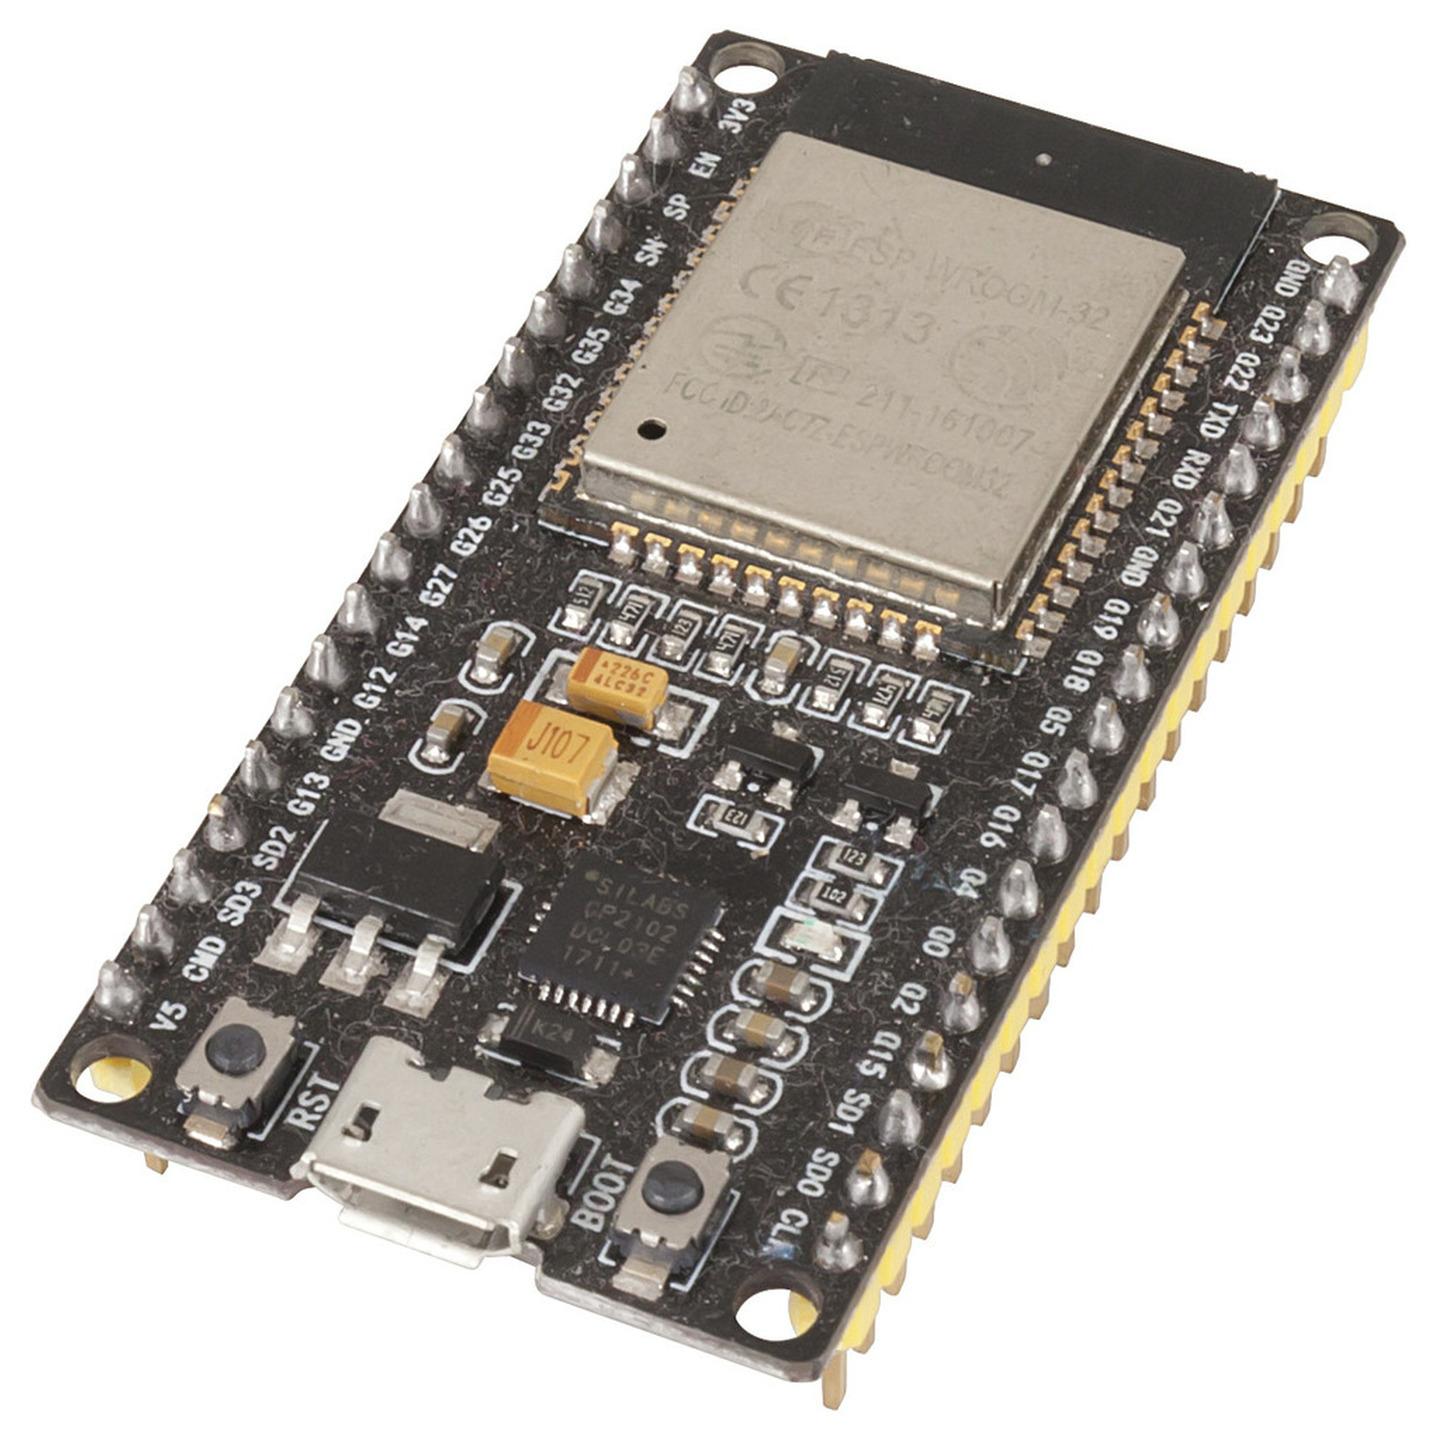 Duinotech ESP32 Main Board with Wi-Fi and Bluetooth